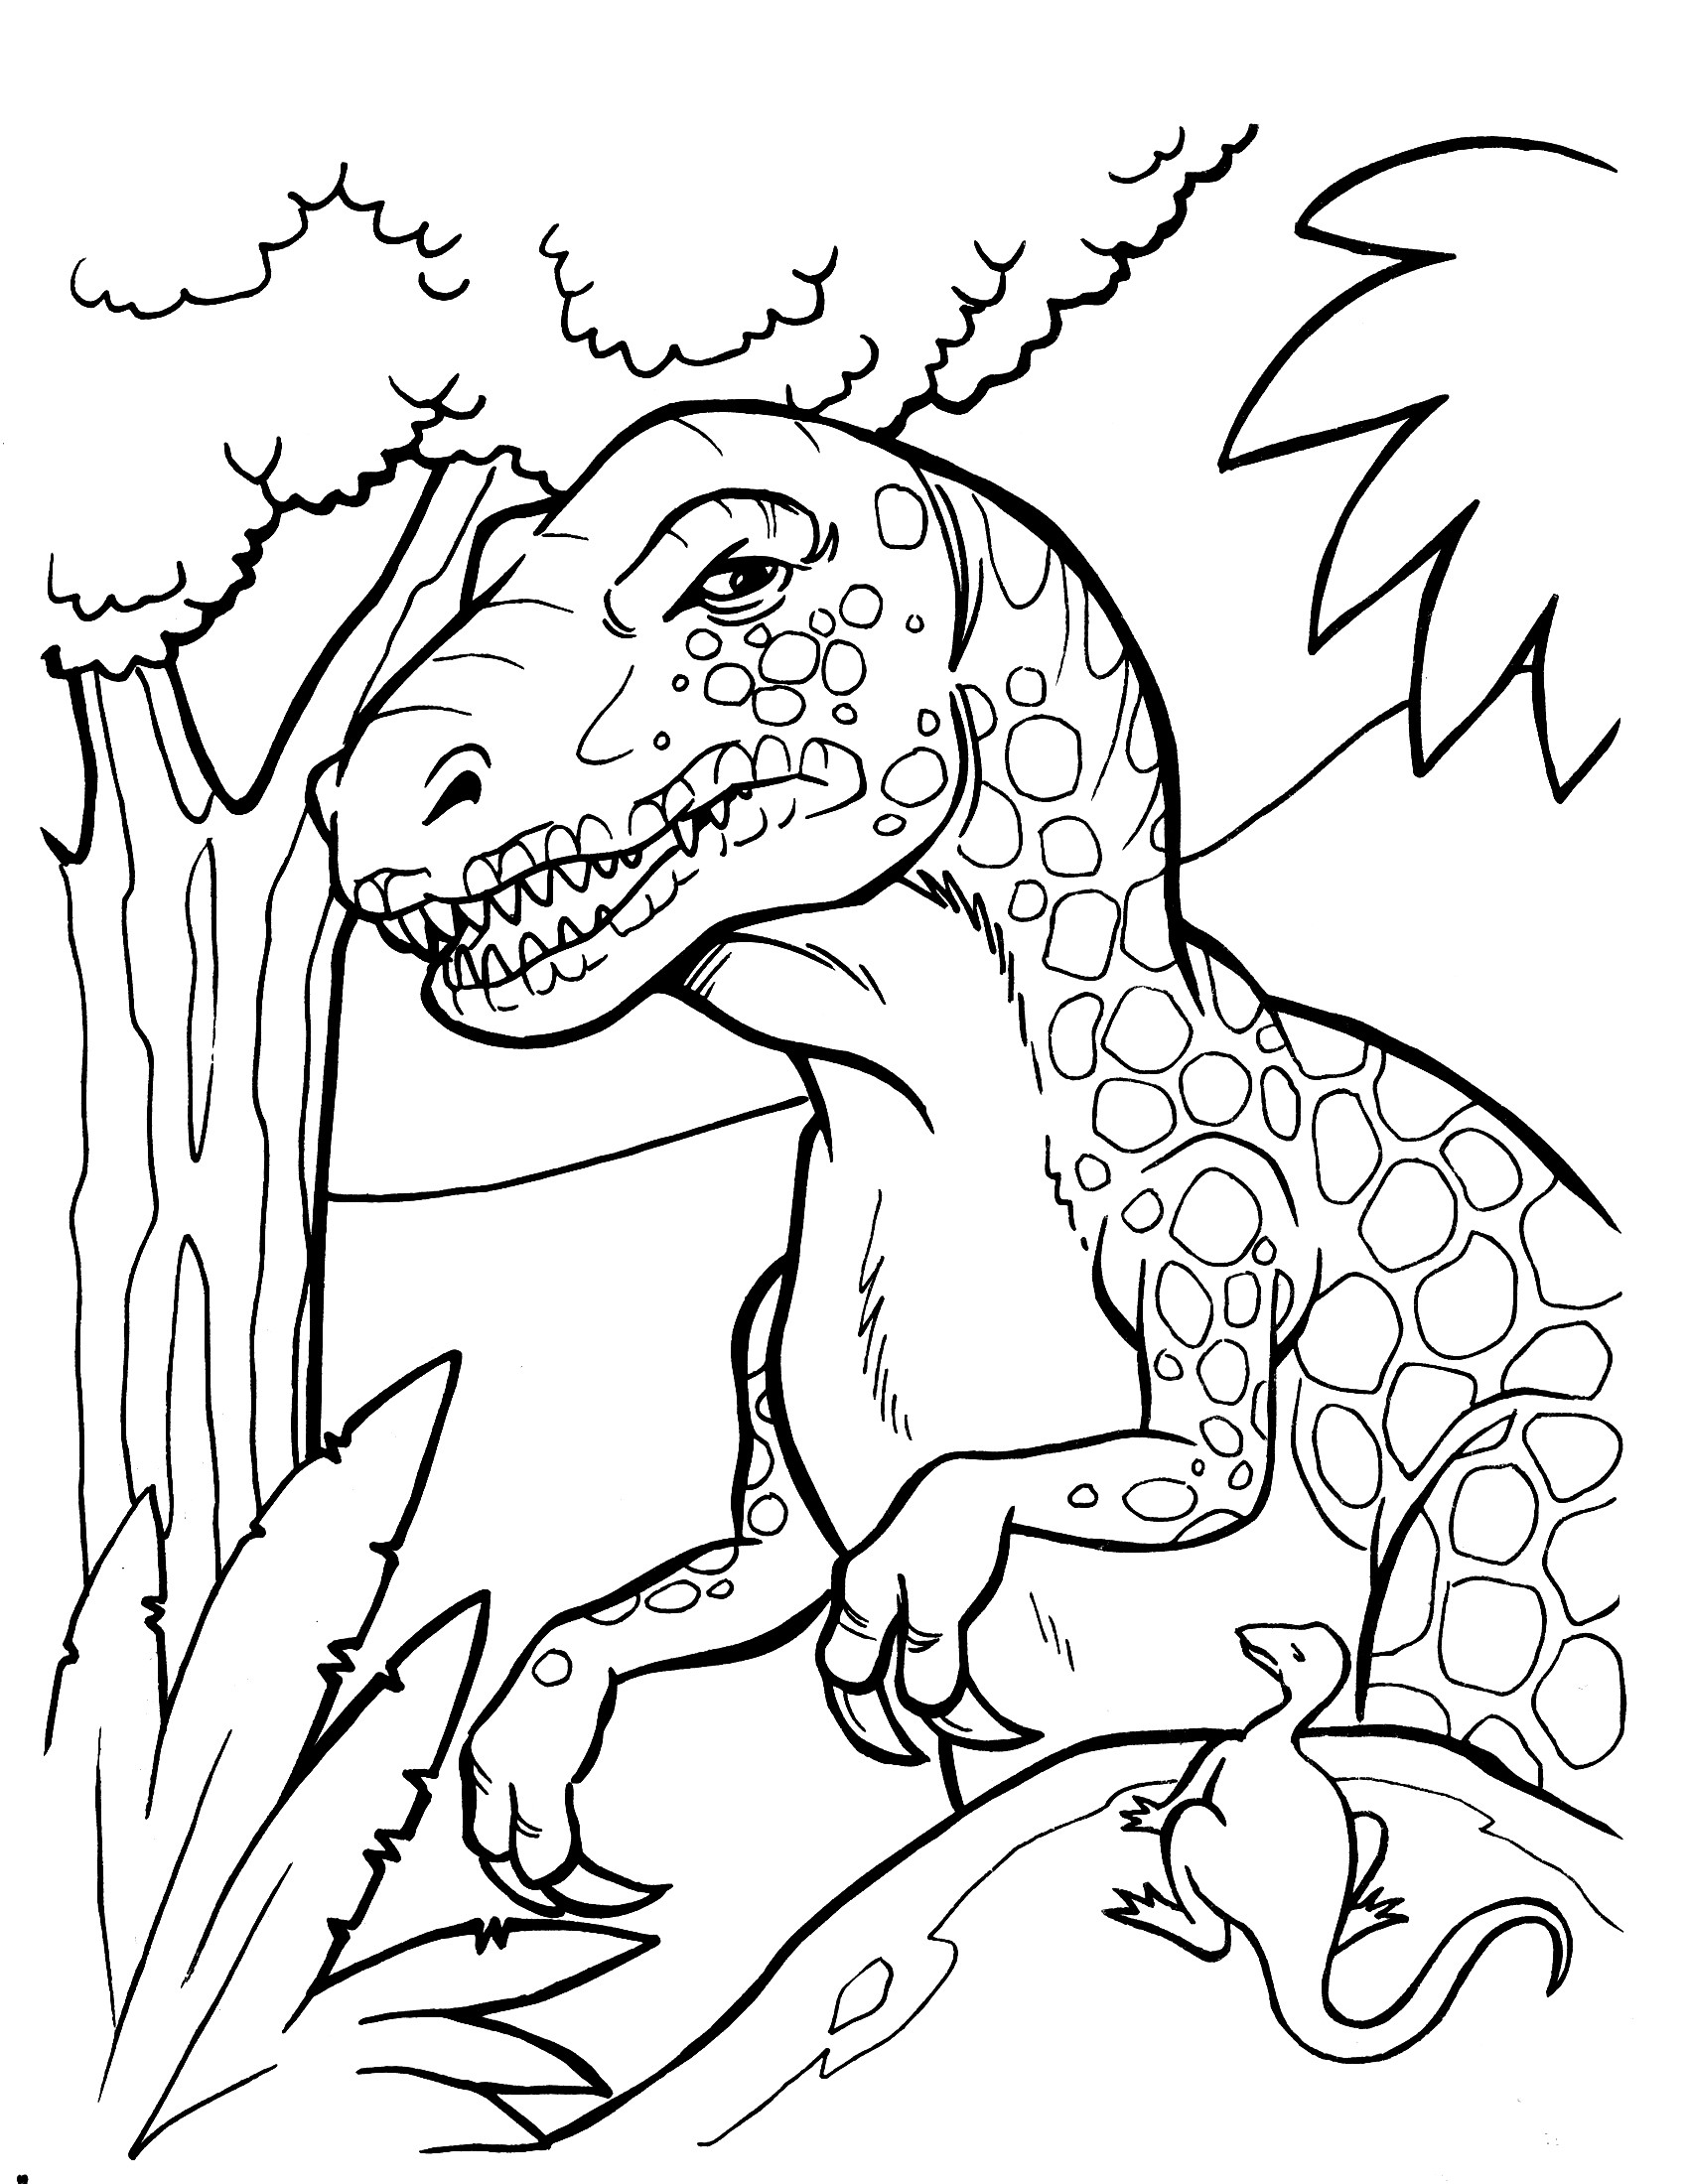 Free Printable Dinosaur Coloring Pages
 Dinosaur Coloring Pages